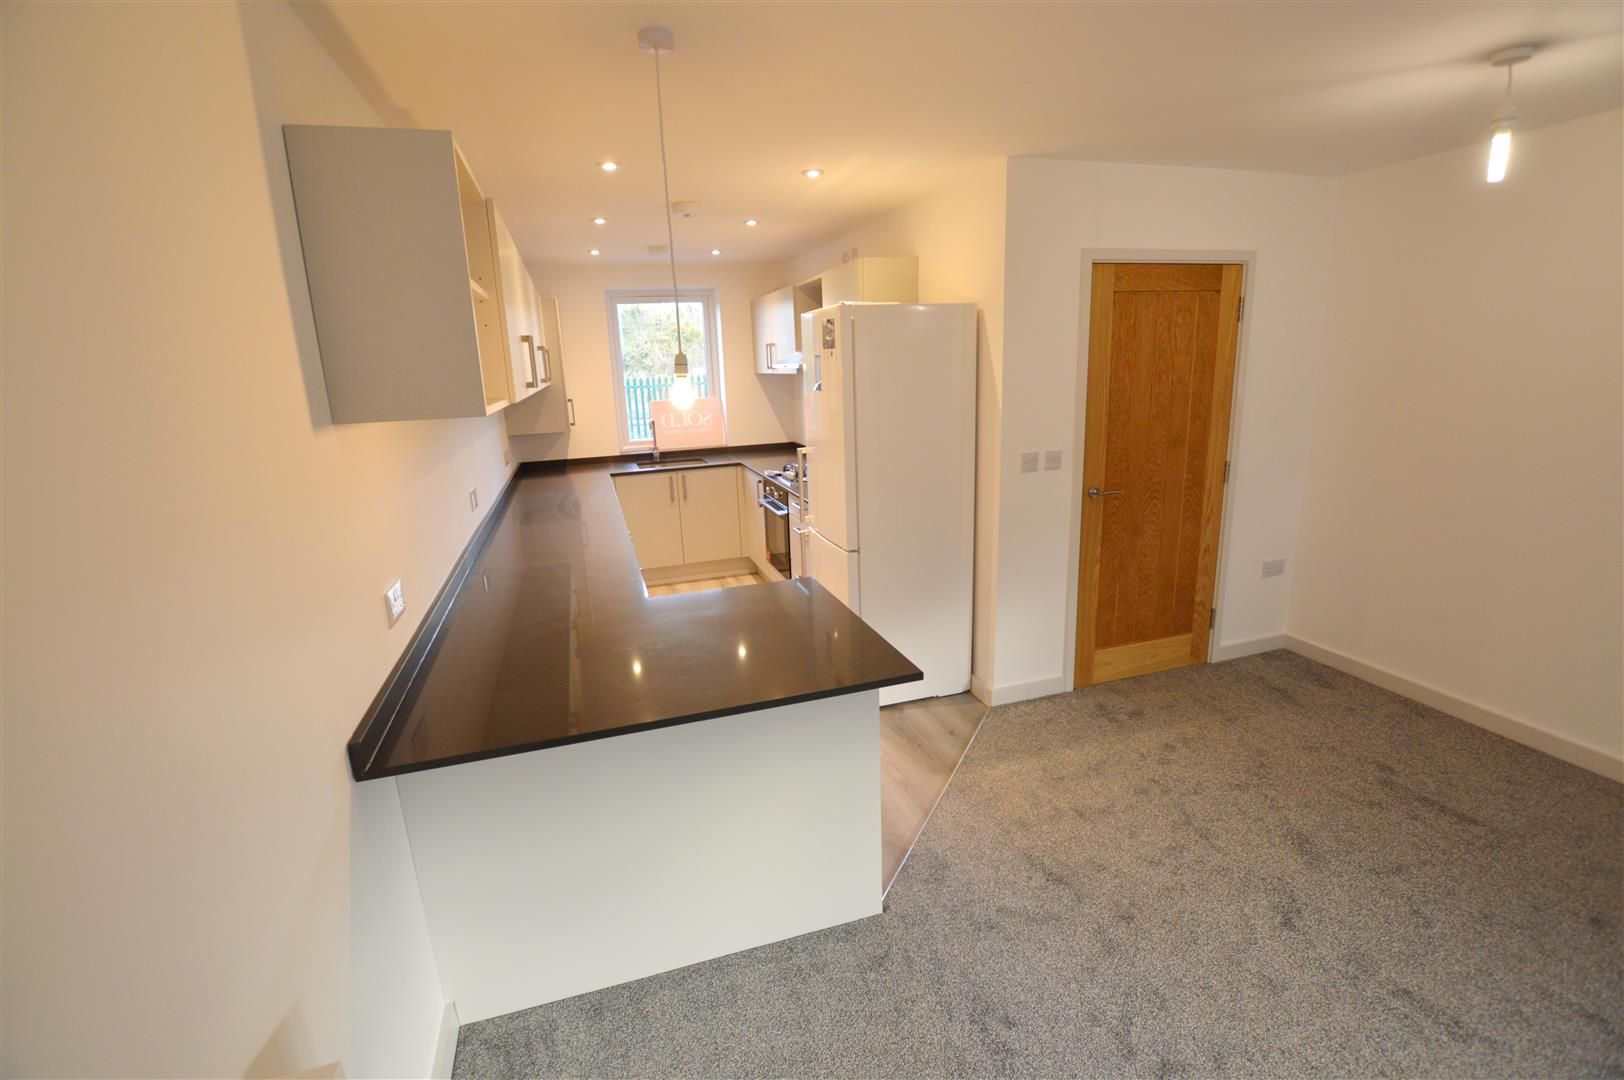 3 bed terraced for sale in Leominster 7